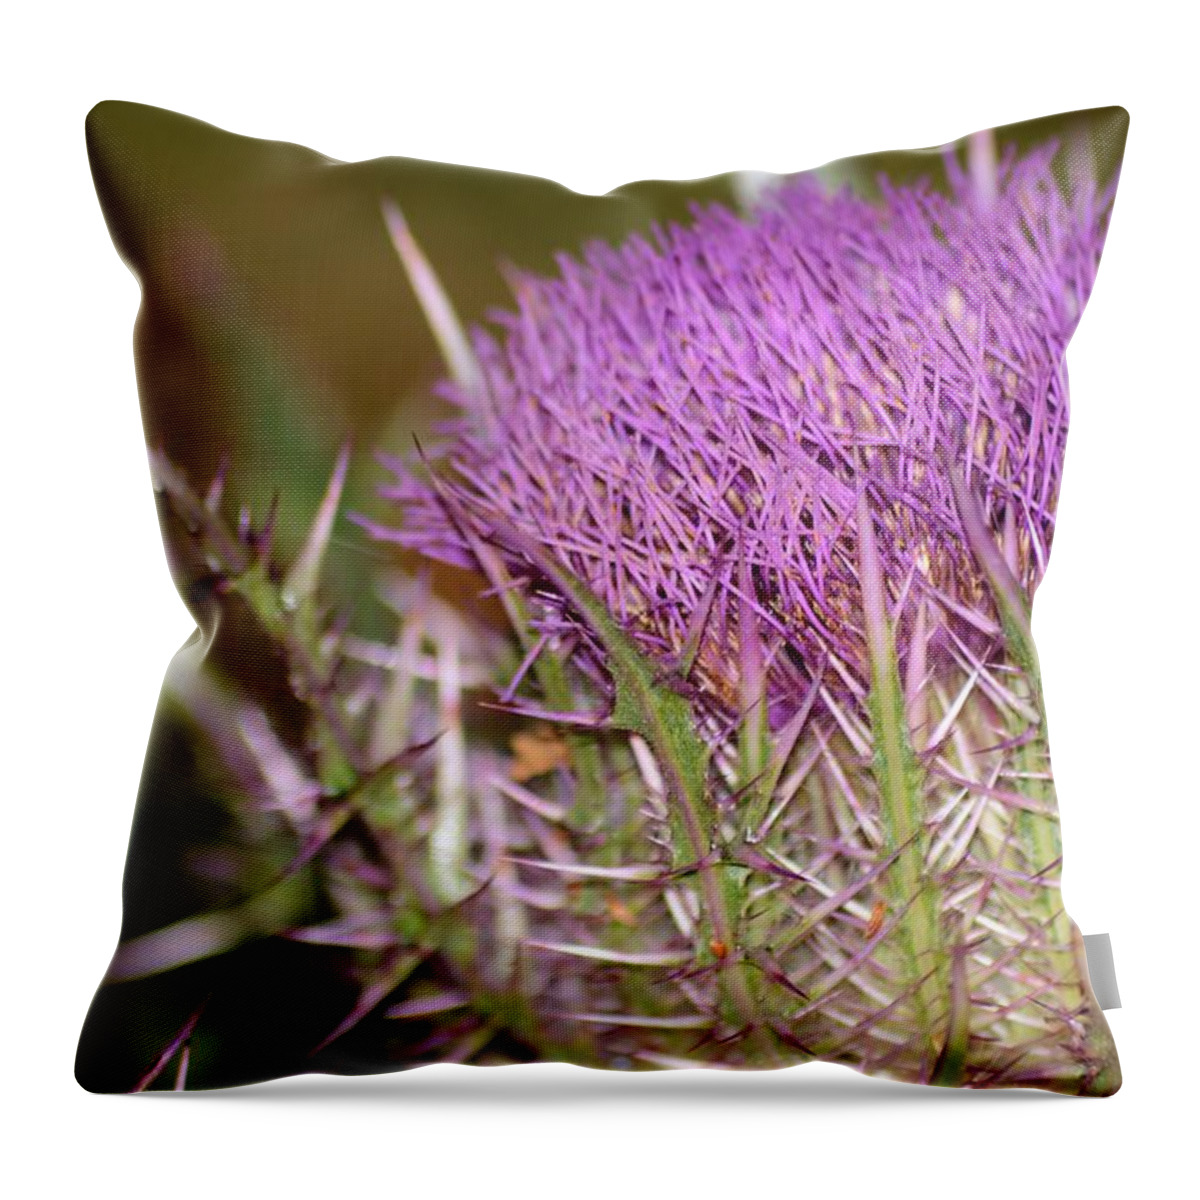 Thistle And Thorns Throw Pillow featuring the photograph Thistle and Thorns by Warren Thompson